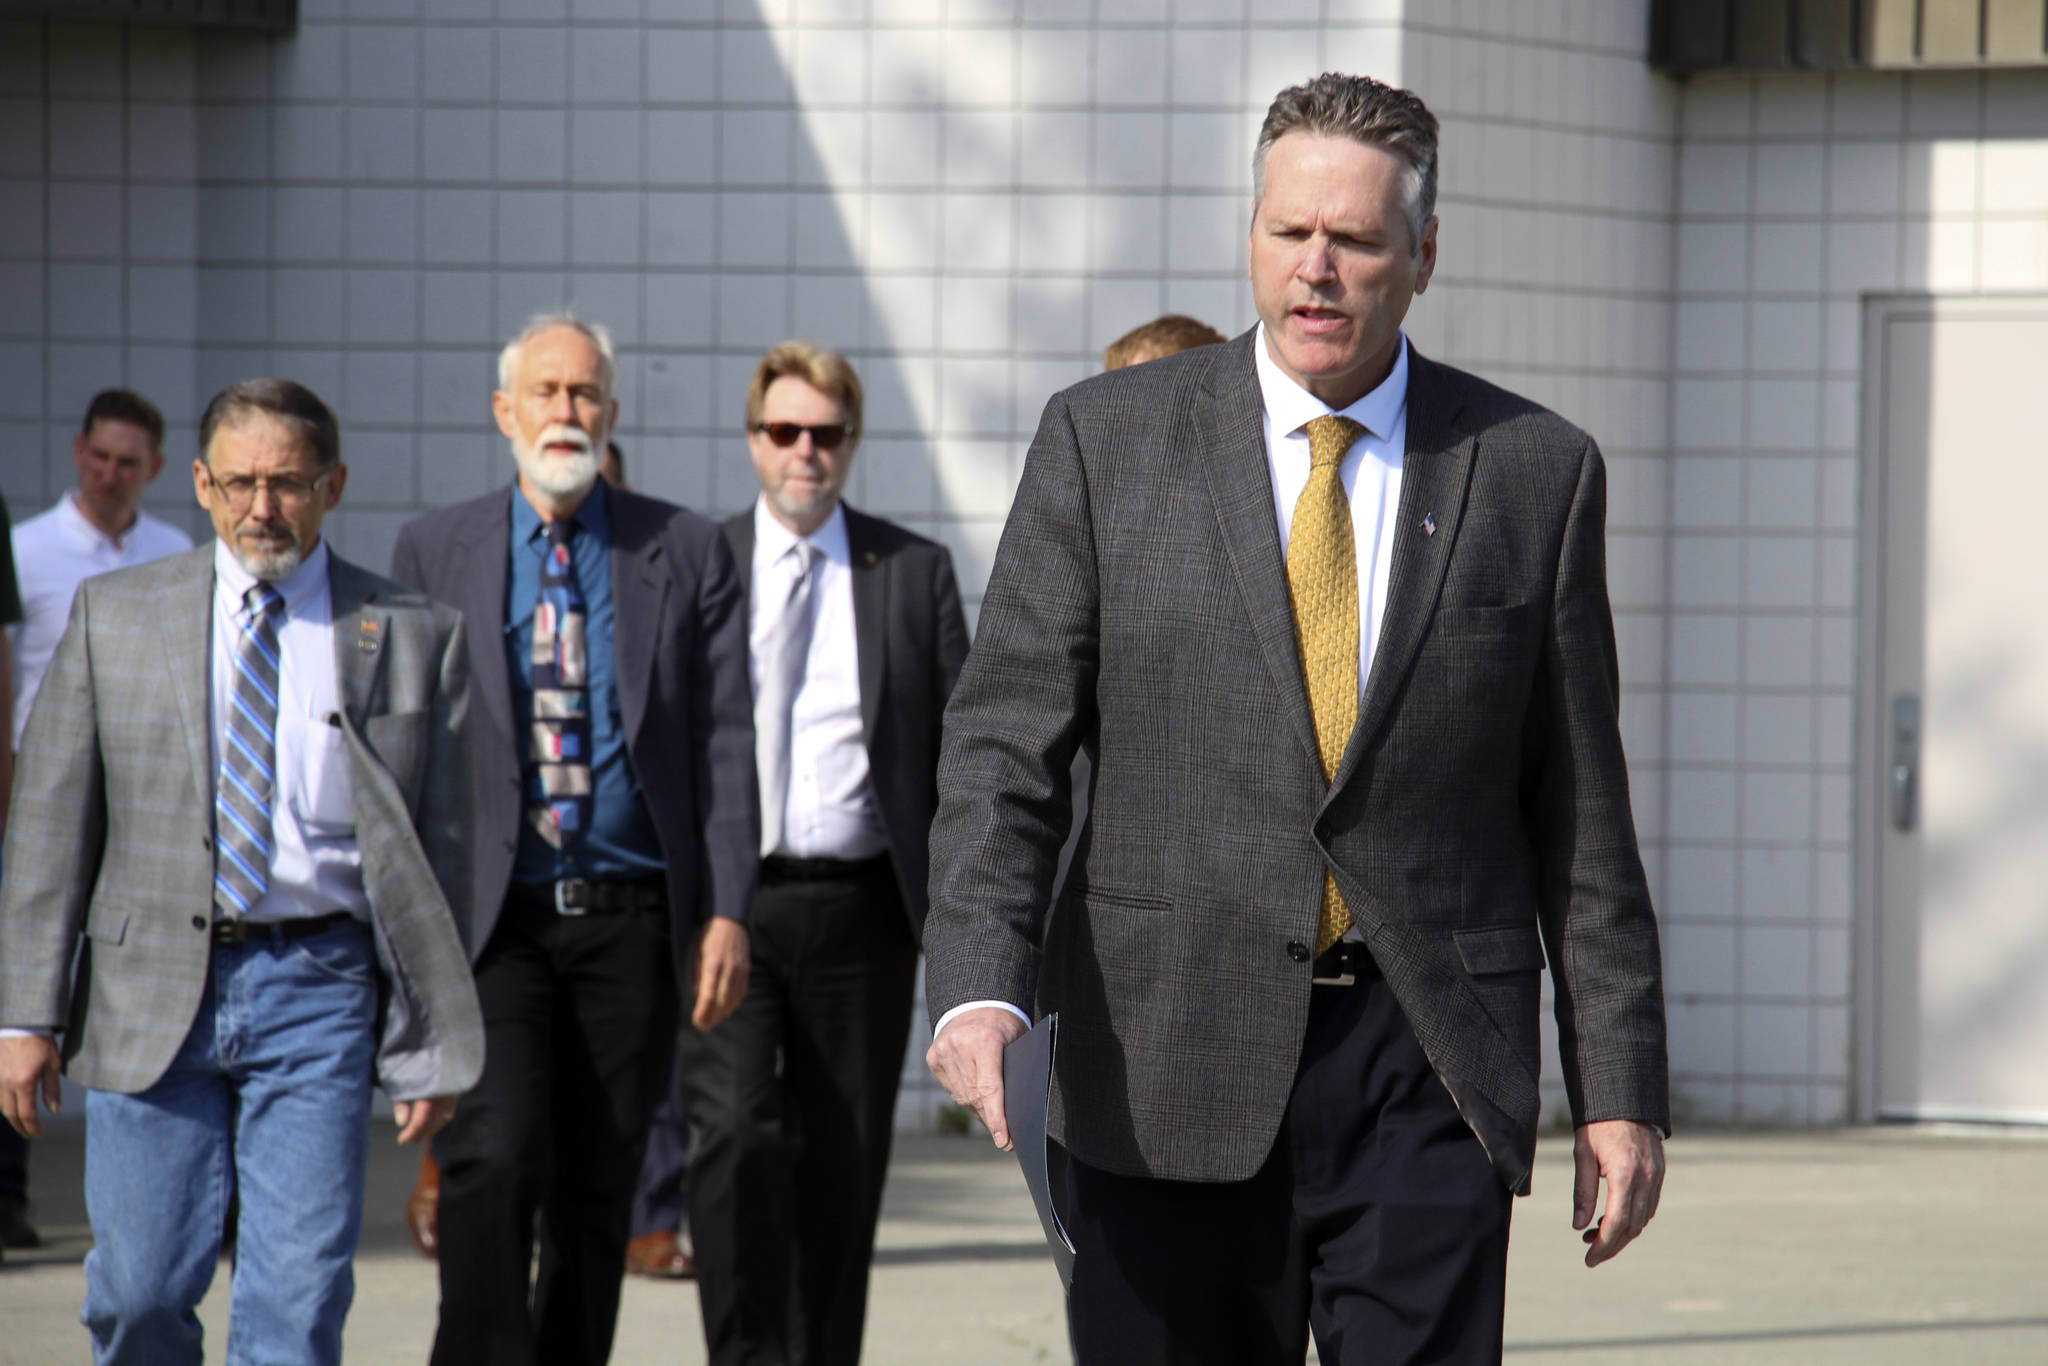 This June 14 file photo shows Gov. Mike Dunleavy leading state and local officials out of Wasilla Middle School in Wasilla to a news conference. (AP Photo/Mark Thiessen, File)